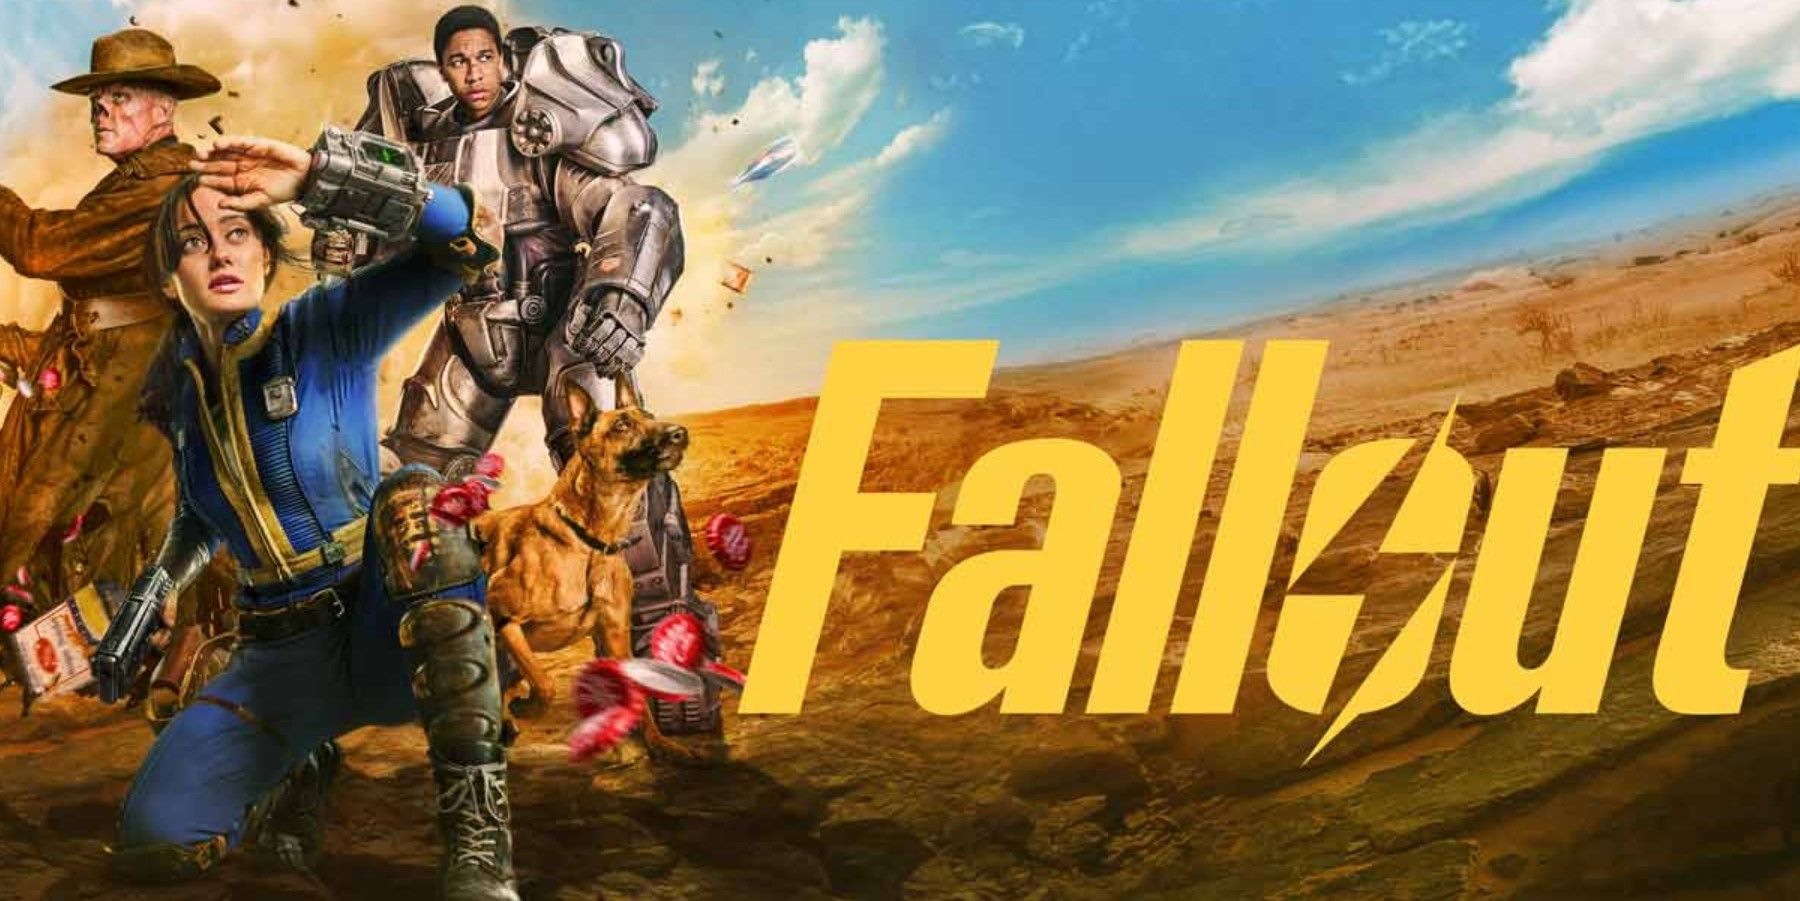 Fallout Cast, Crew Talk Secrets, Relationships, And Adapting The Games